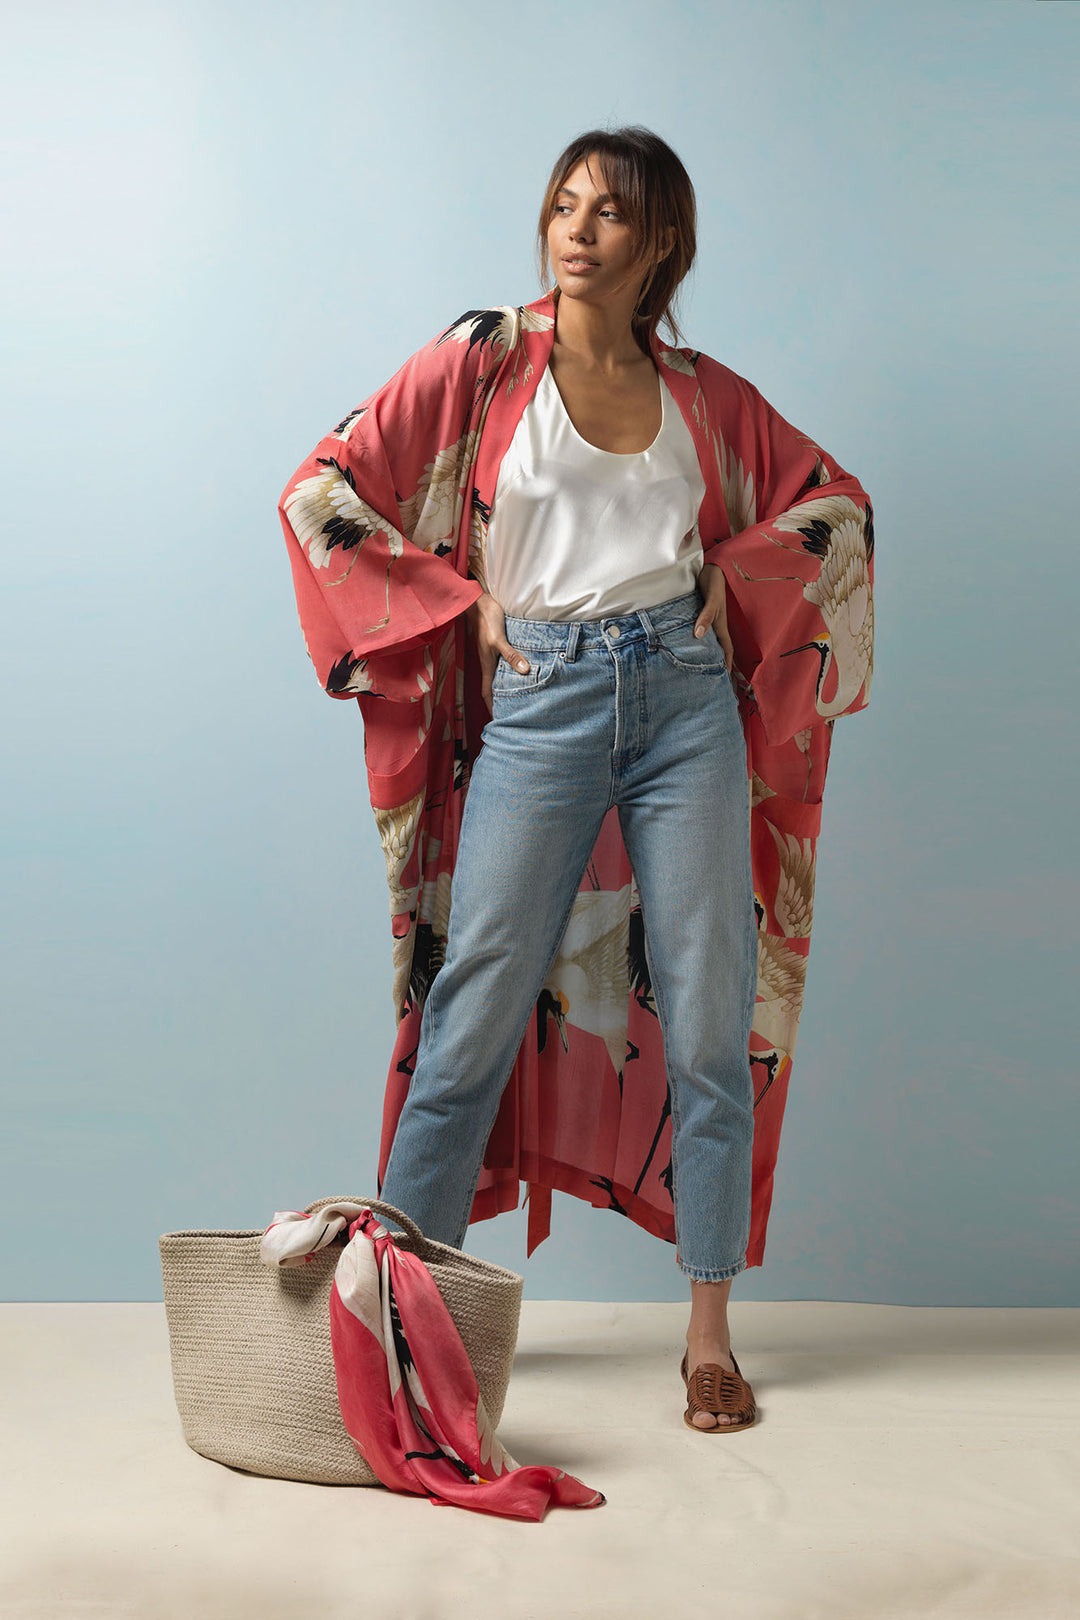 One Hundred Stars Stork Crane Lipstick Pink Crepe Long Kimono can be styled with blue jeans, silk vest top and woven accessories to create a joyful summer look. 